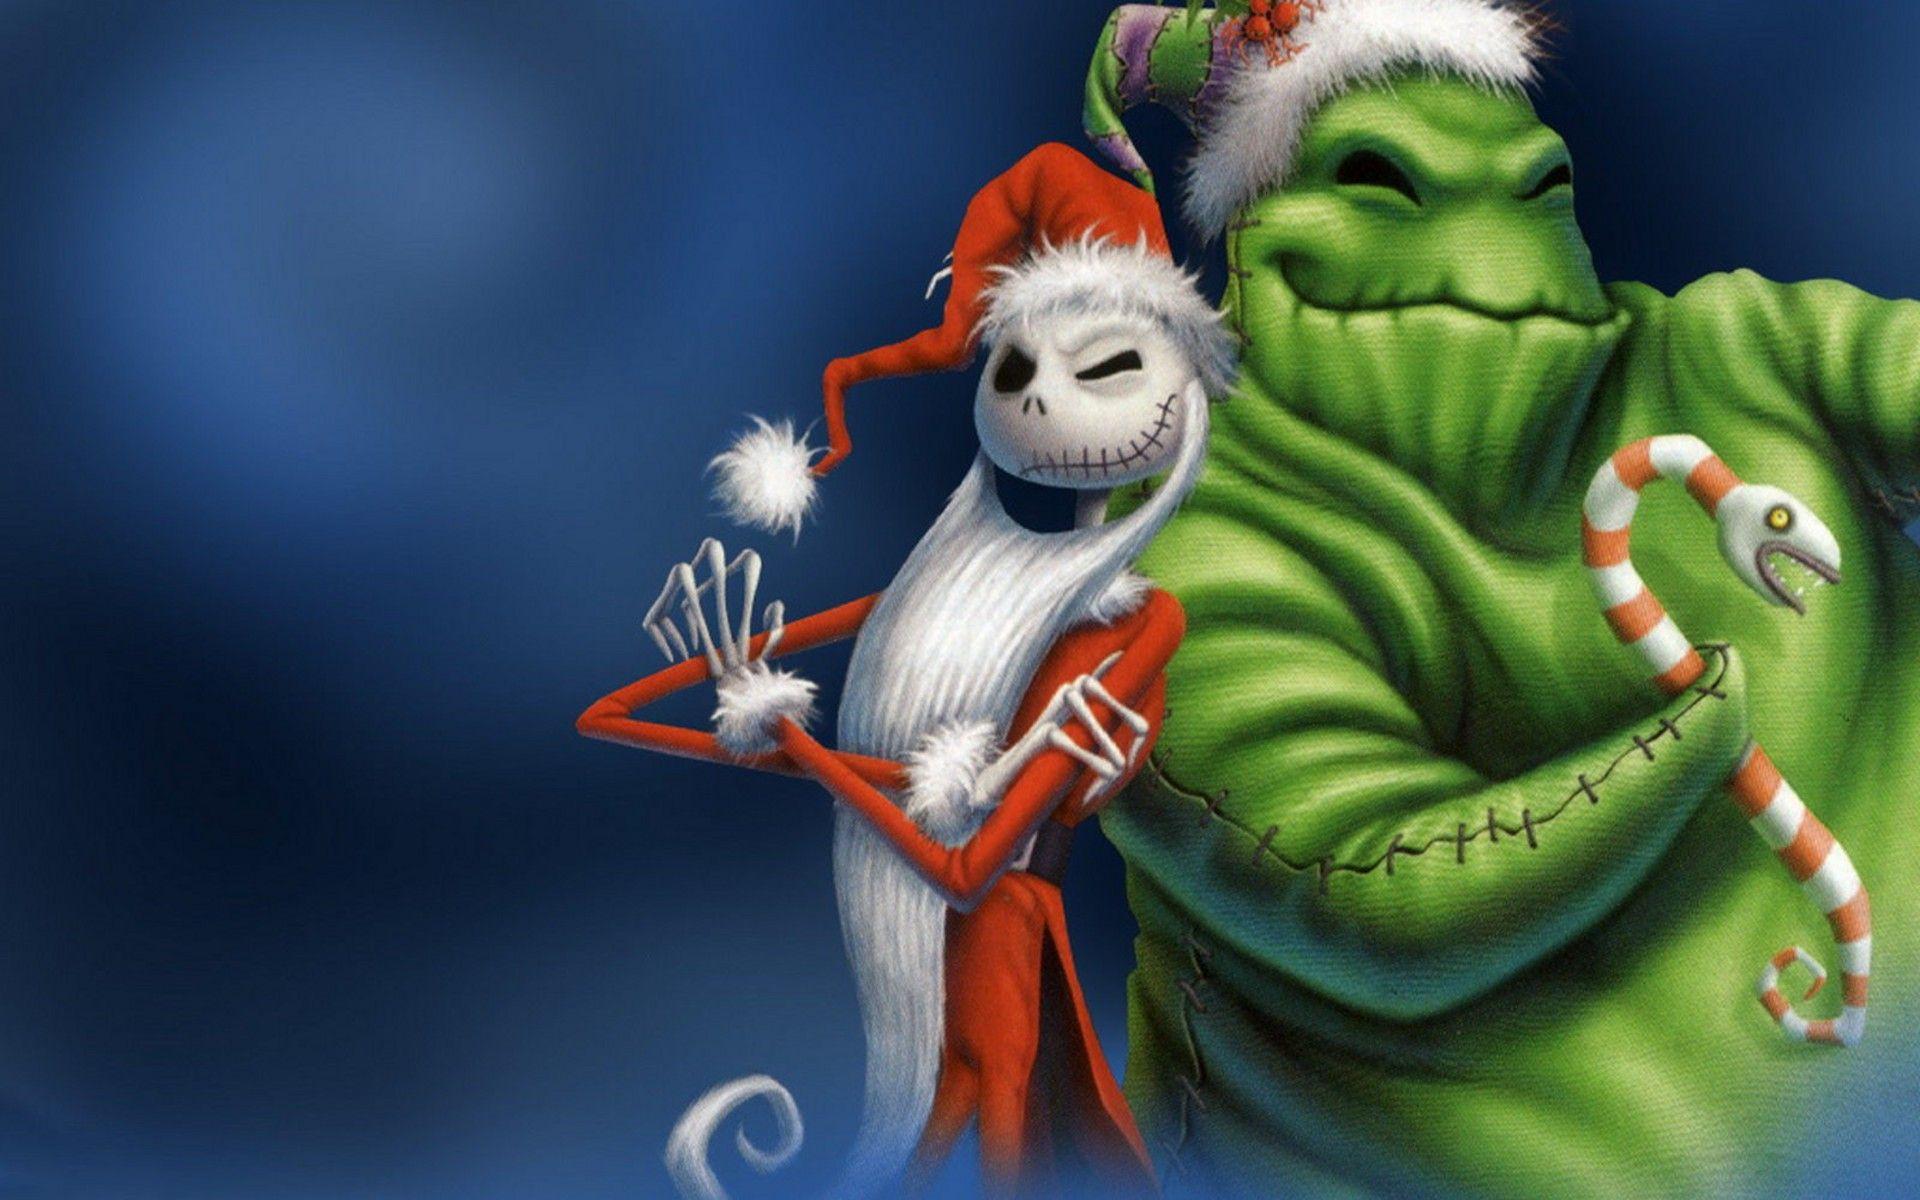 The Nightmare Before Christmas Wallpapers - Wallpaper Cave